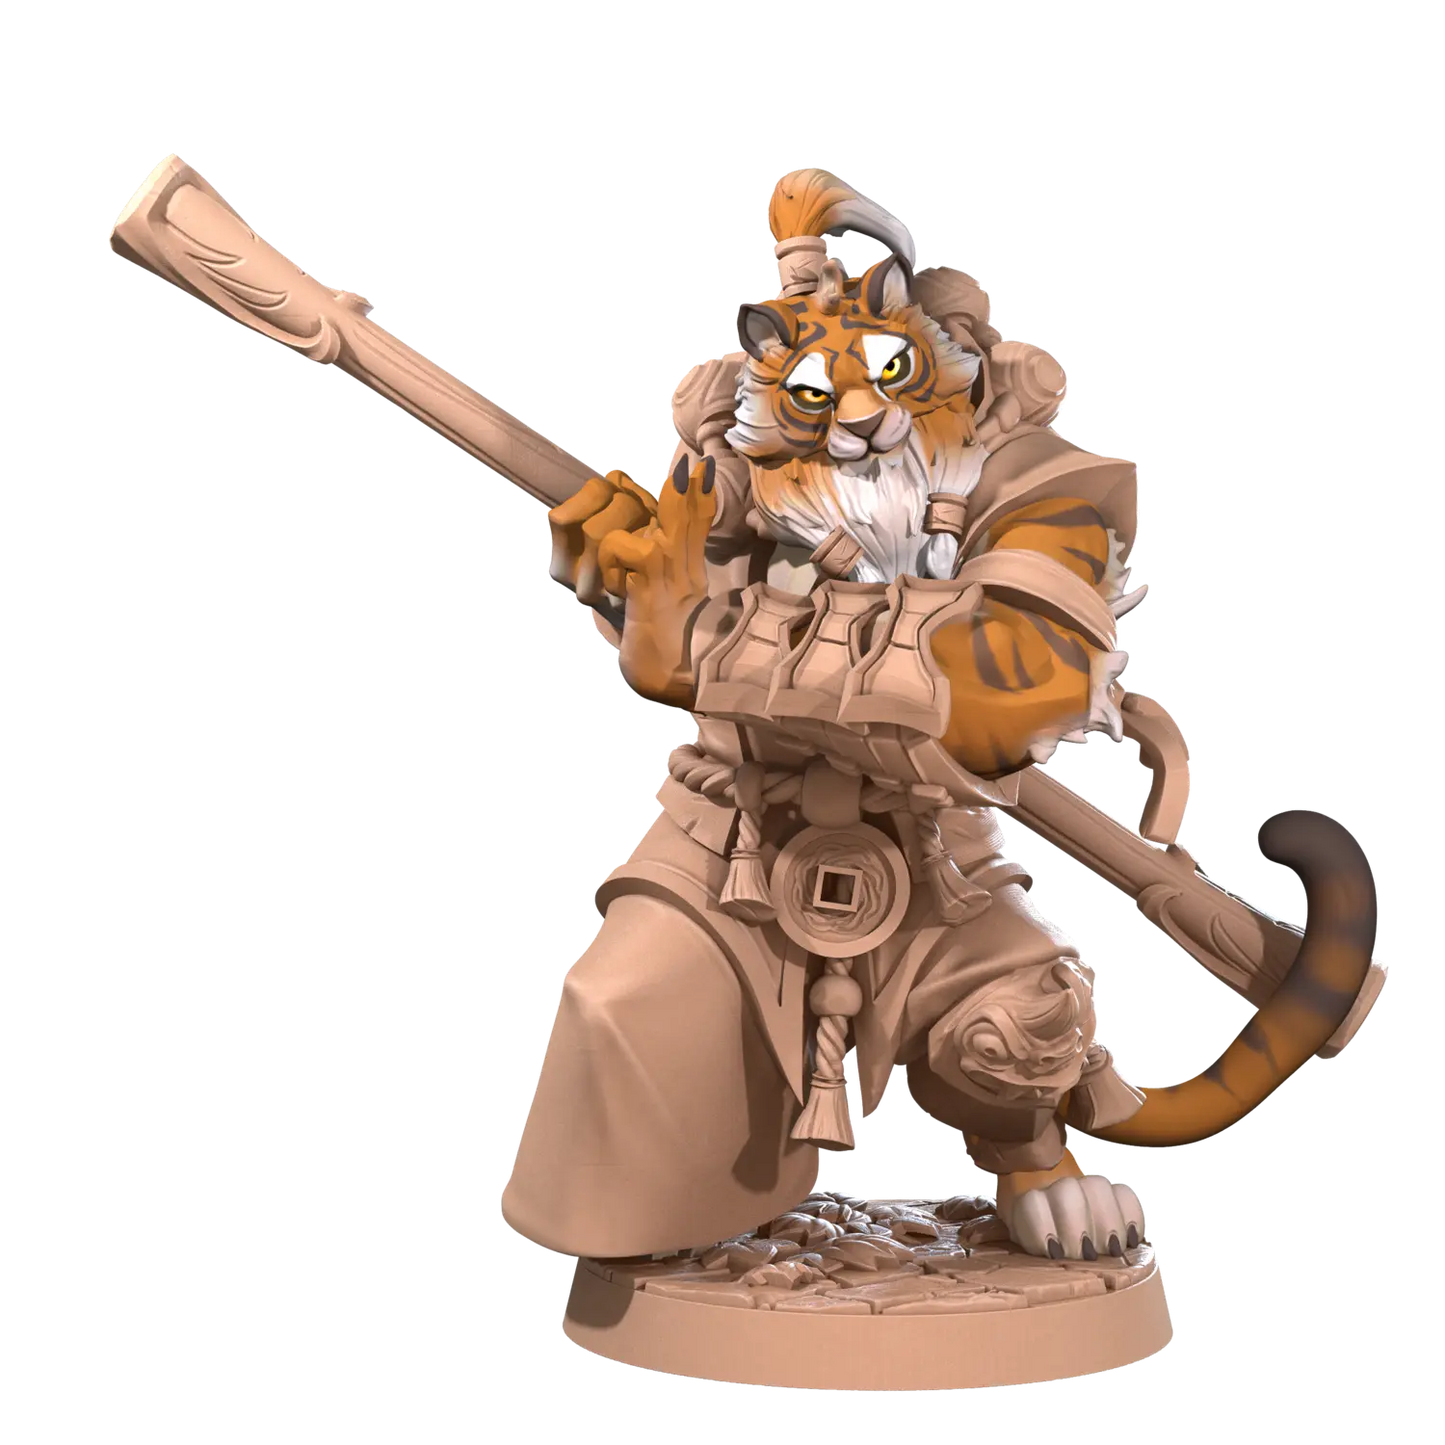 DnD Miniature - Monk - Tabaxi Ajax 02 Miniature - Monk - Tabaxi sold by DoubleHitShop